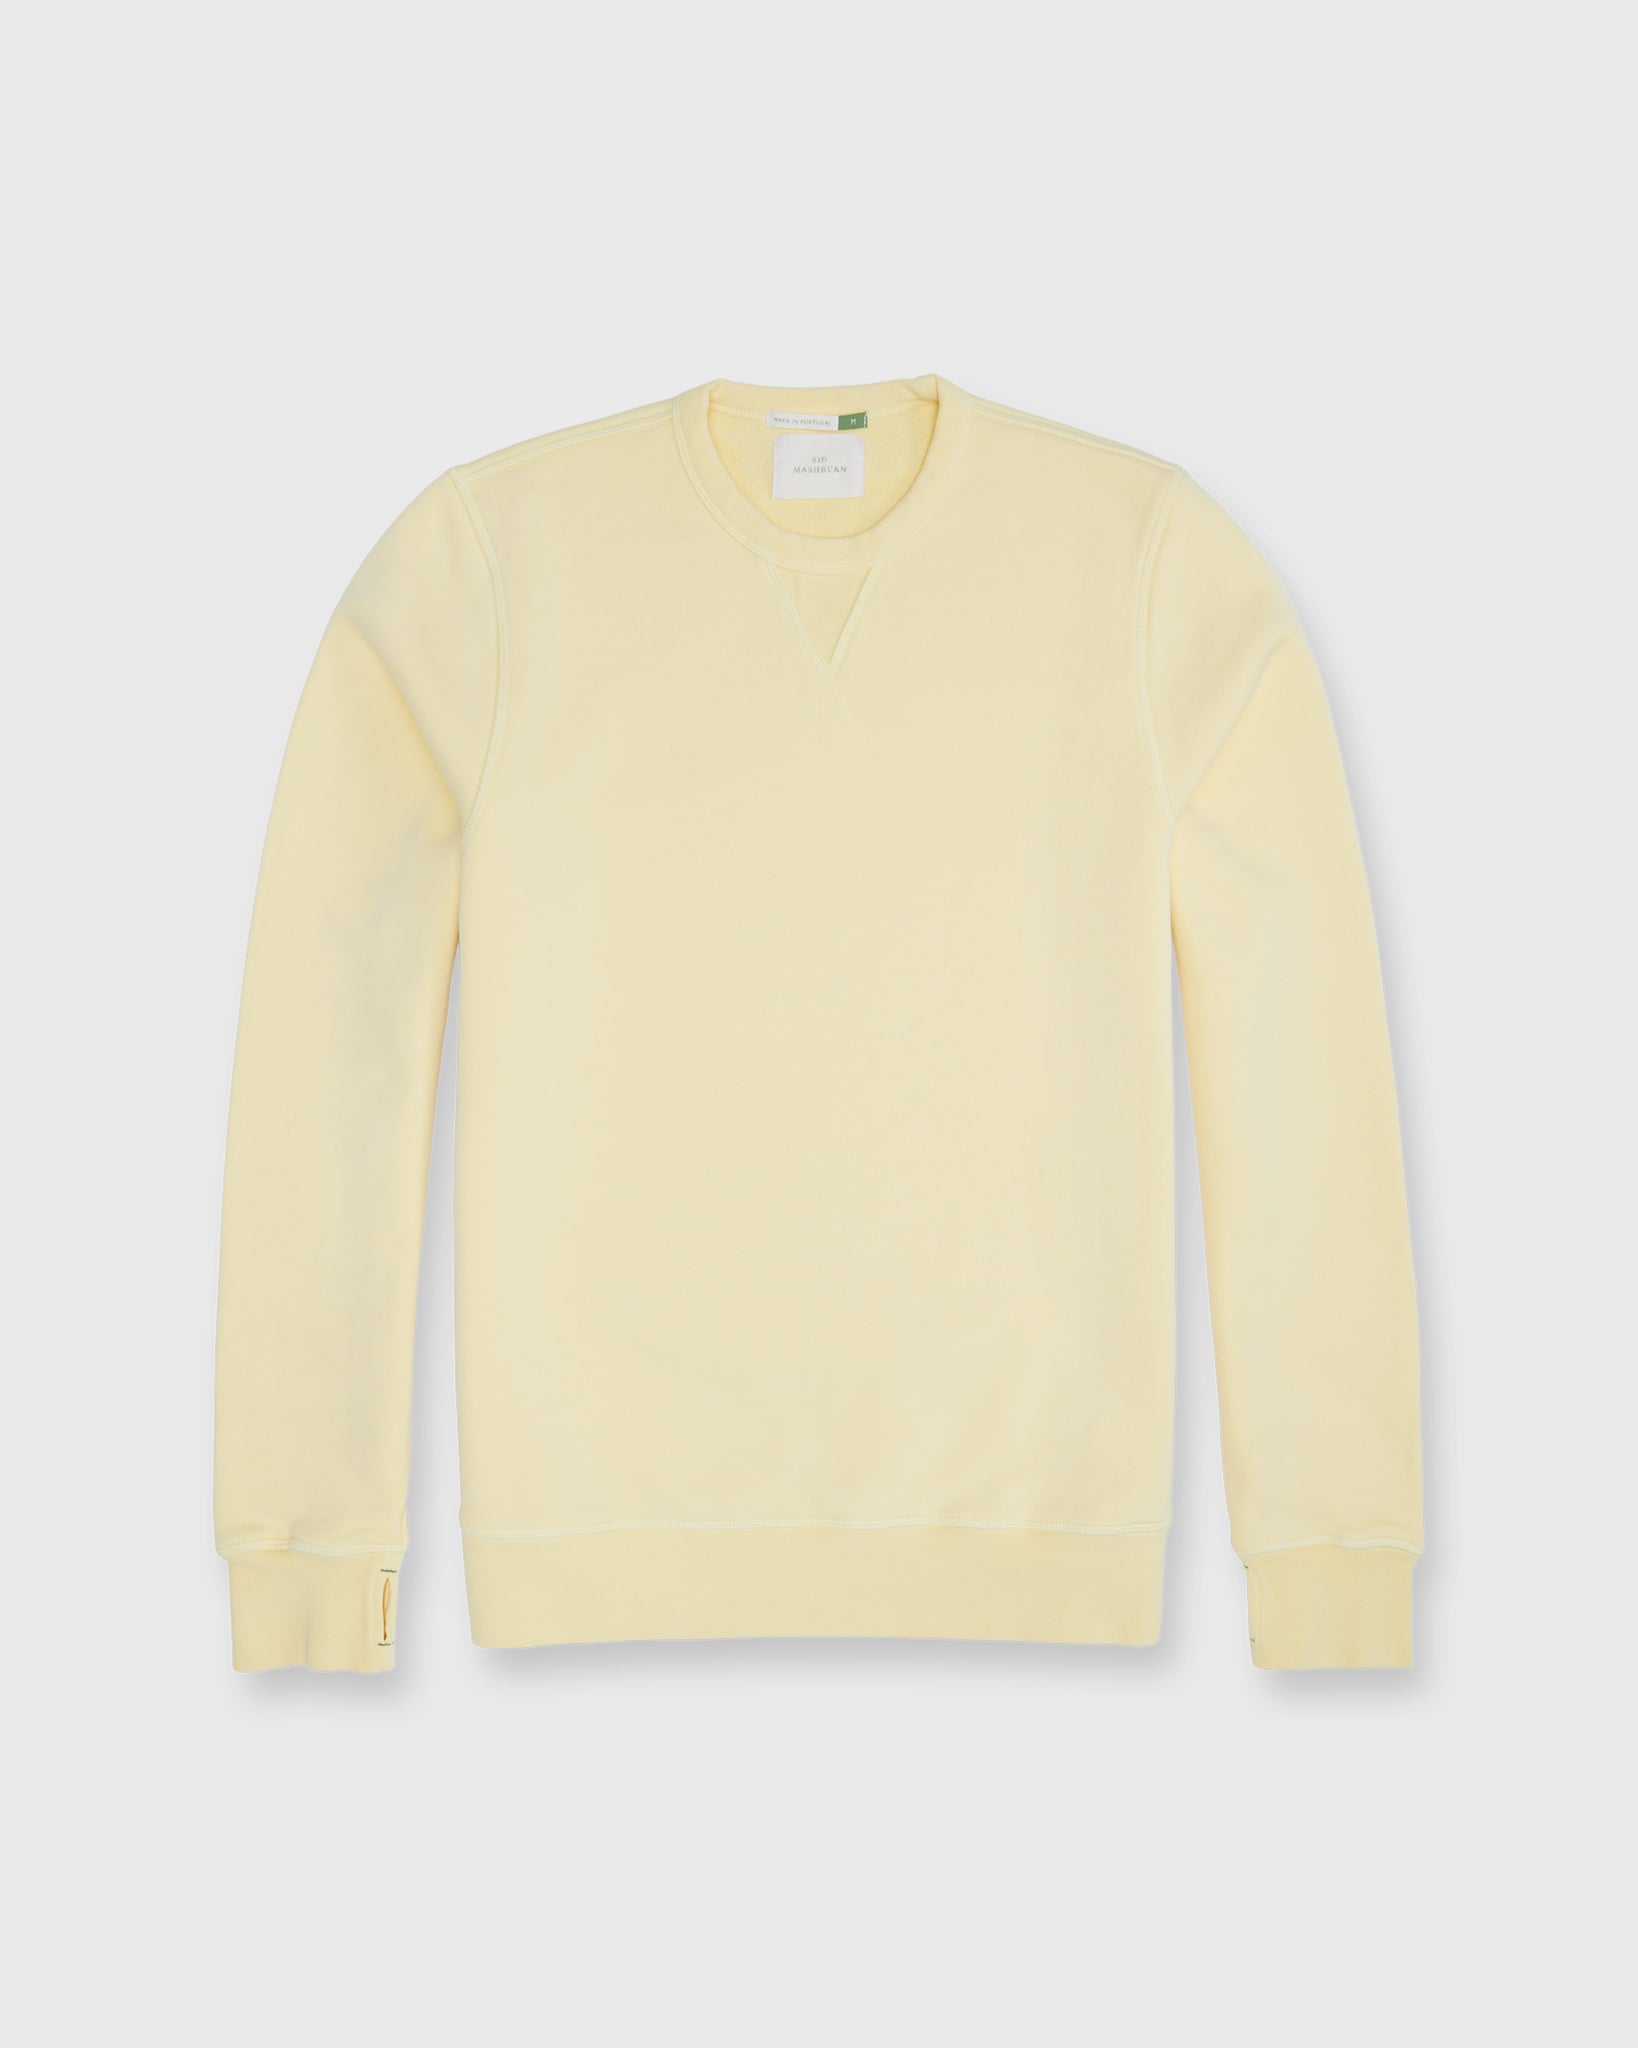 Crewneck Pullover Sweatshirt in Butter French Terry